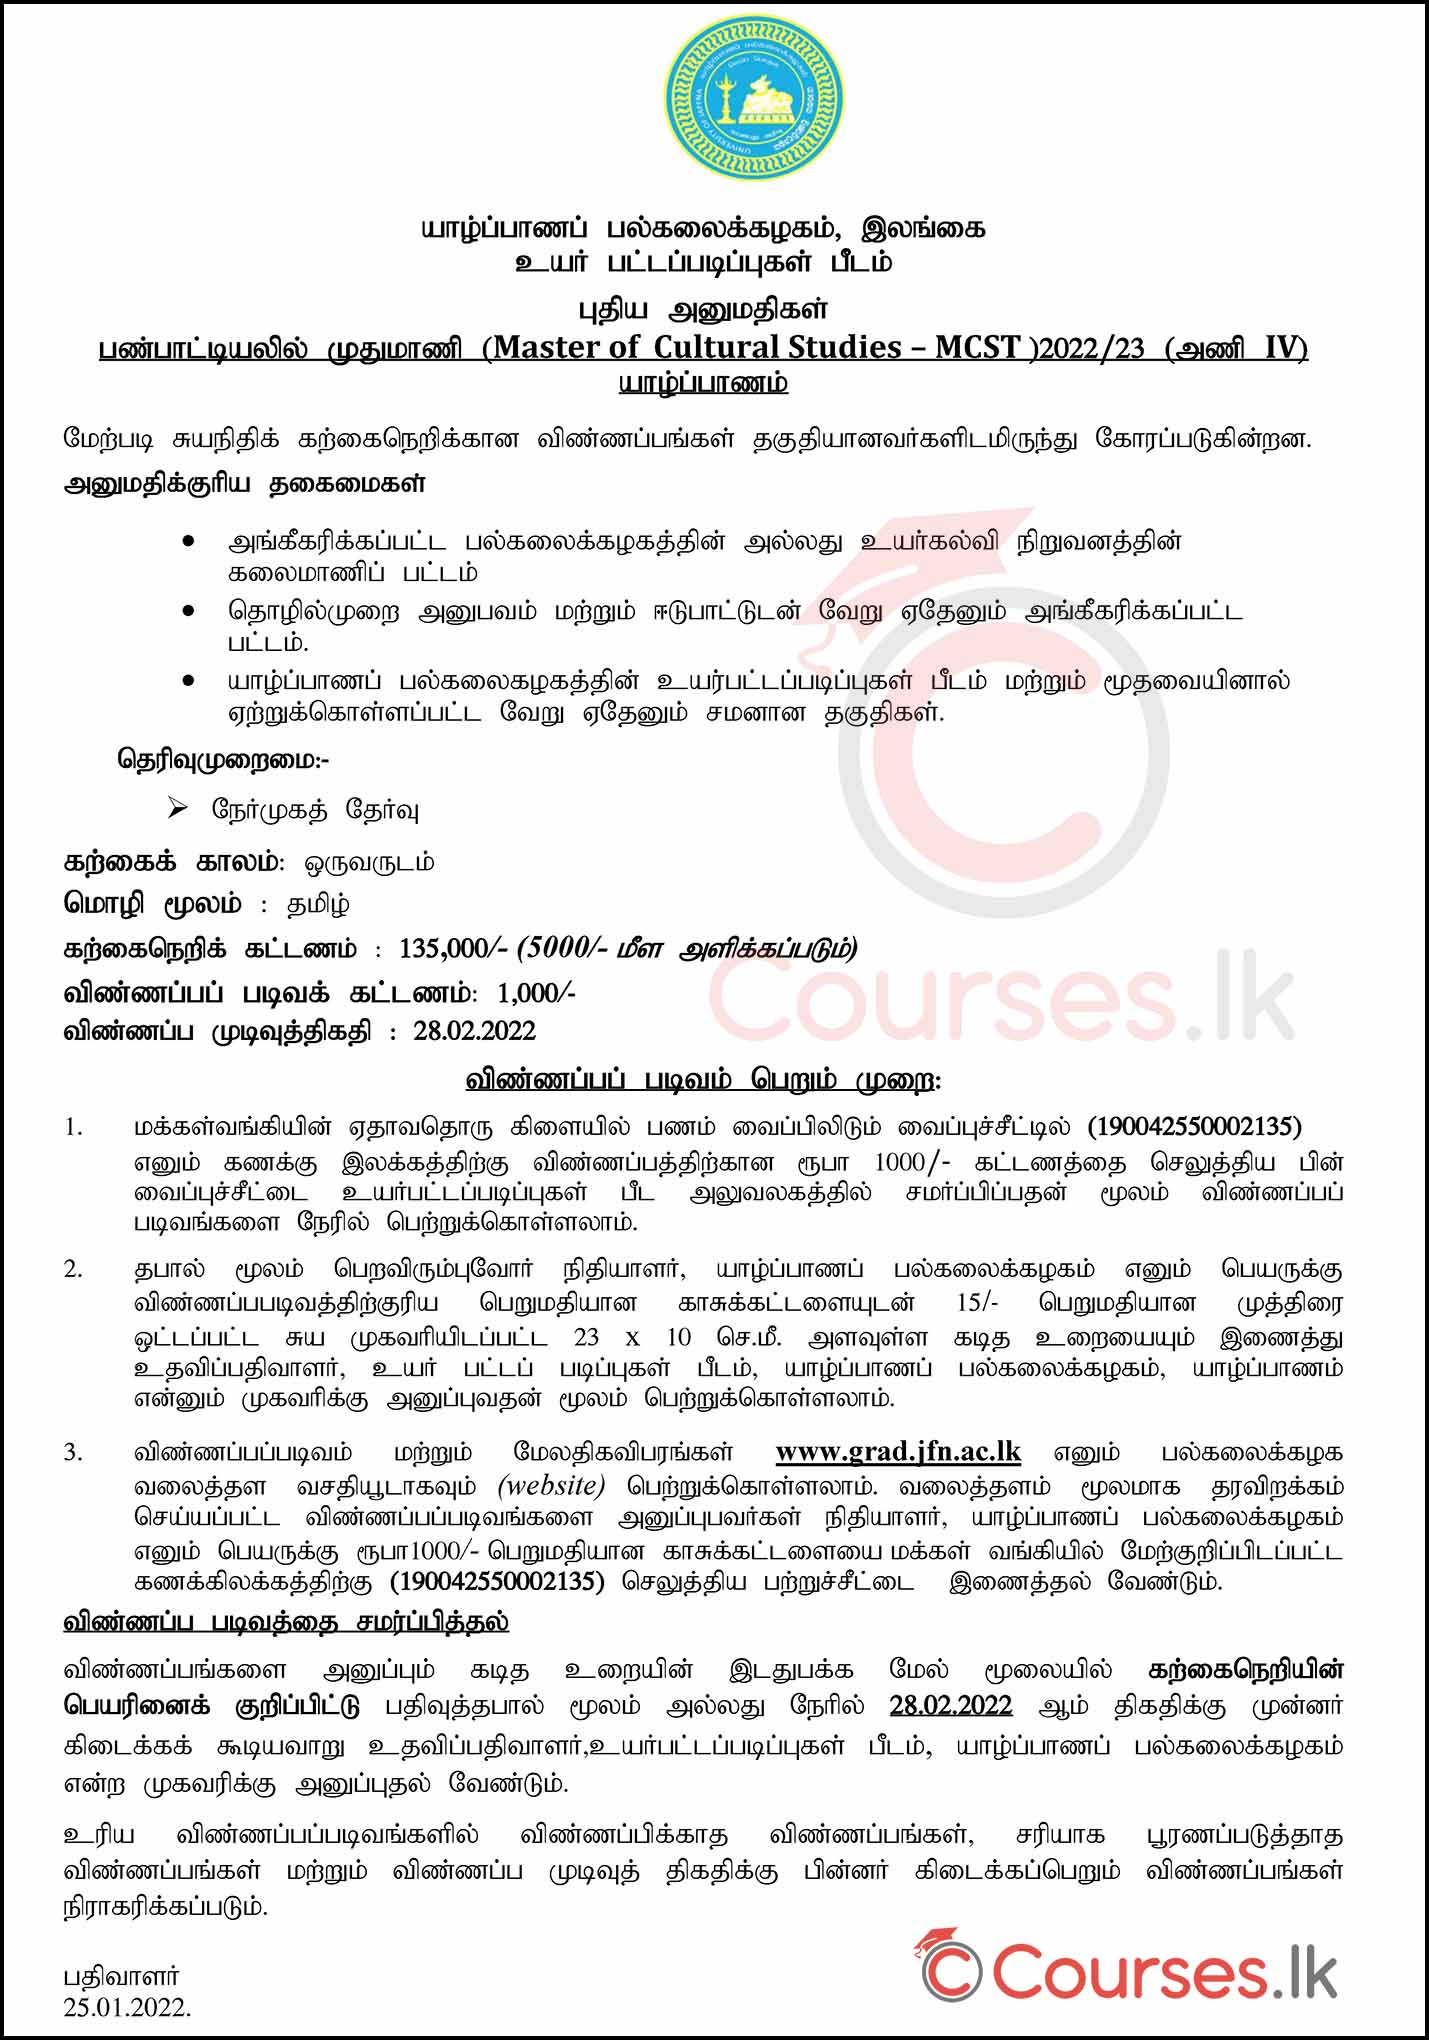 Call for Applications - Master of Cultural Studies Programme (MCST) 2022/2023 (Batch 4) from the Faculty of Graduate Studies, University of Jaffna